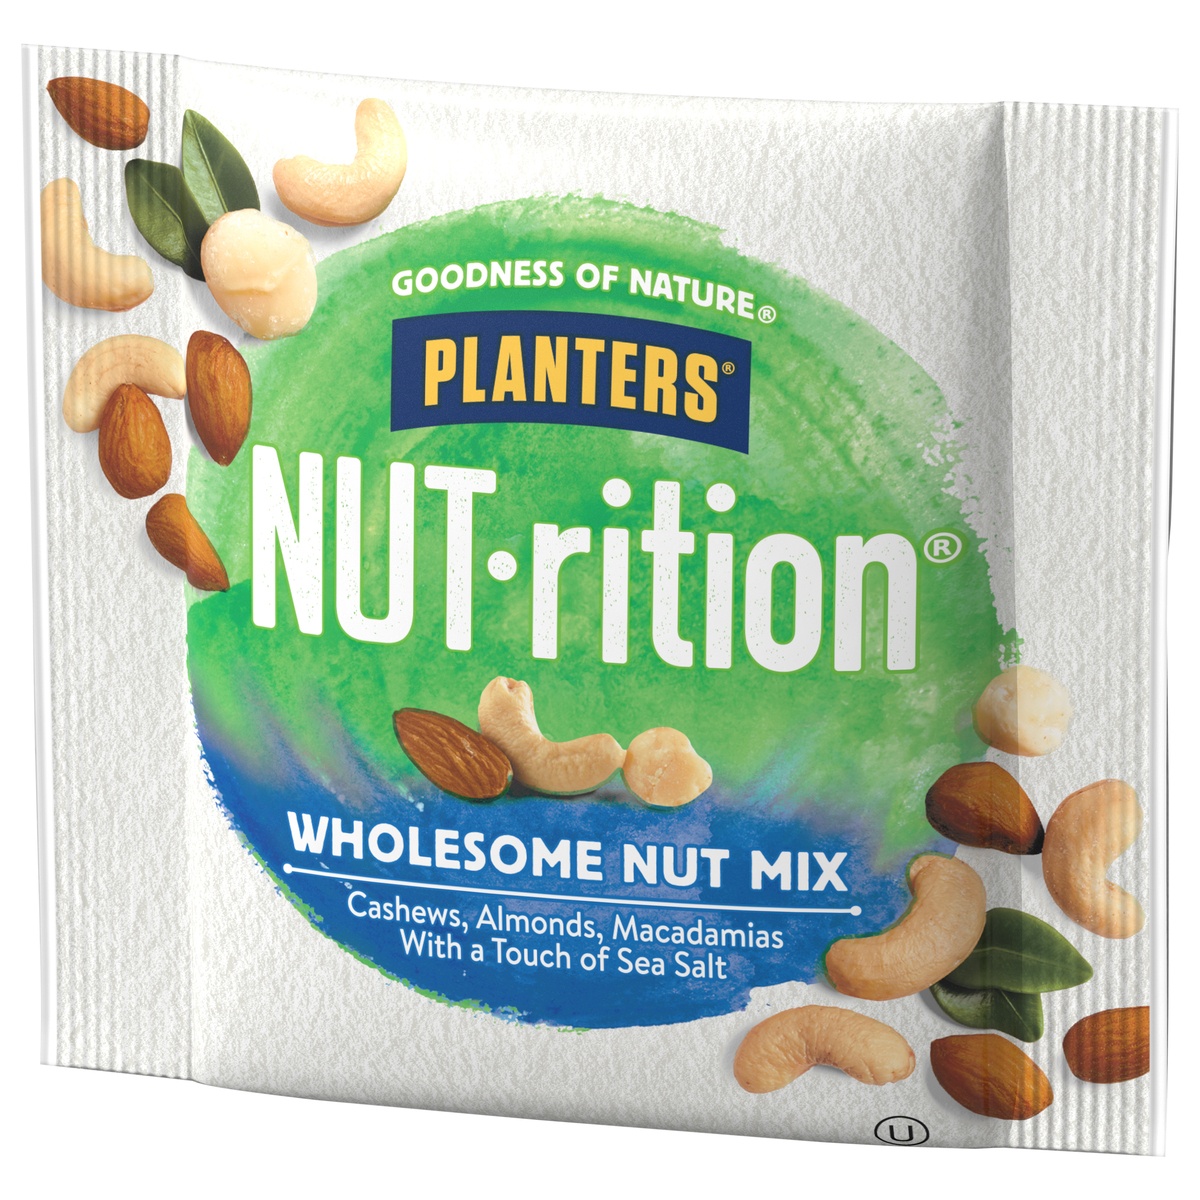 slide 3 of 10, Nut-rition Wholesome Nut Mix 1 ea, 7.5 oz